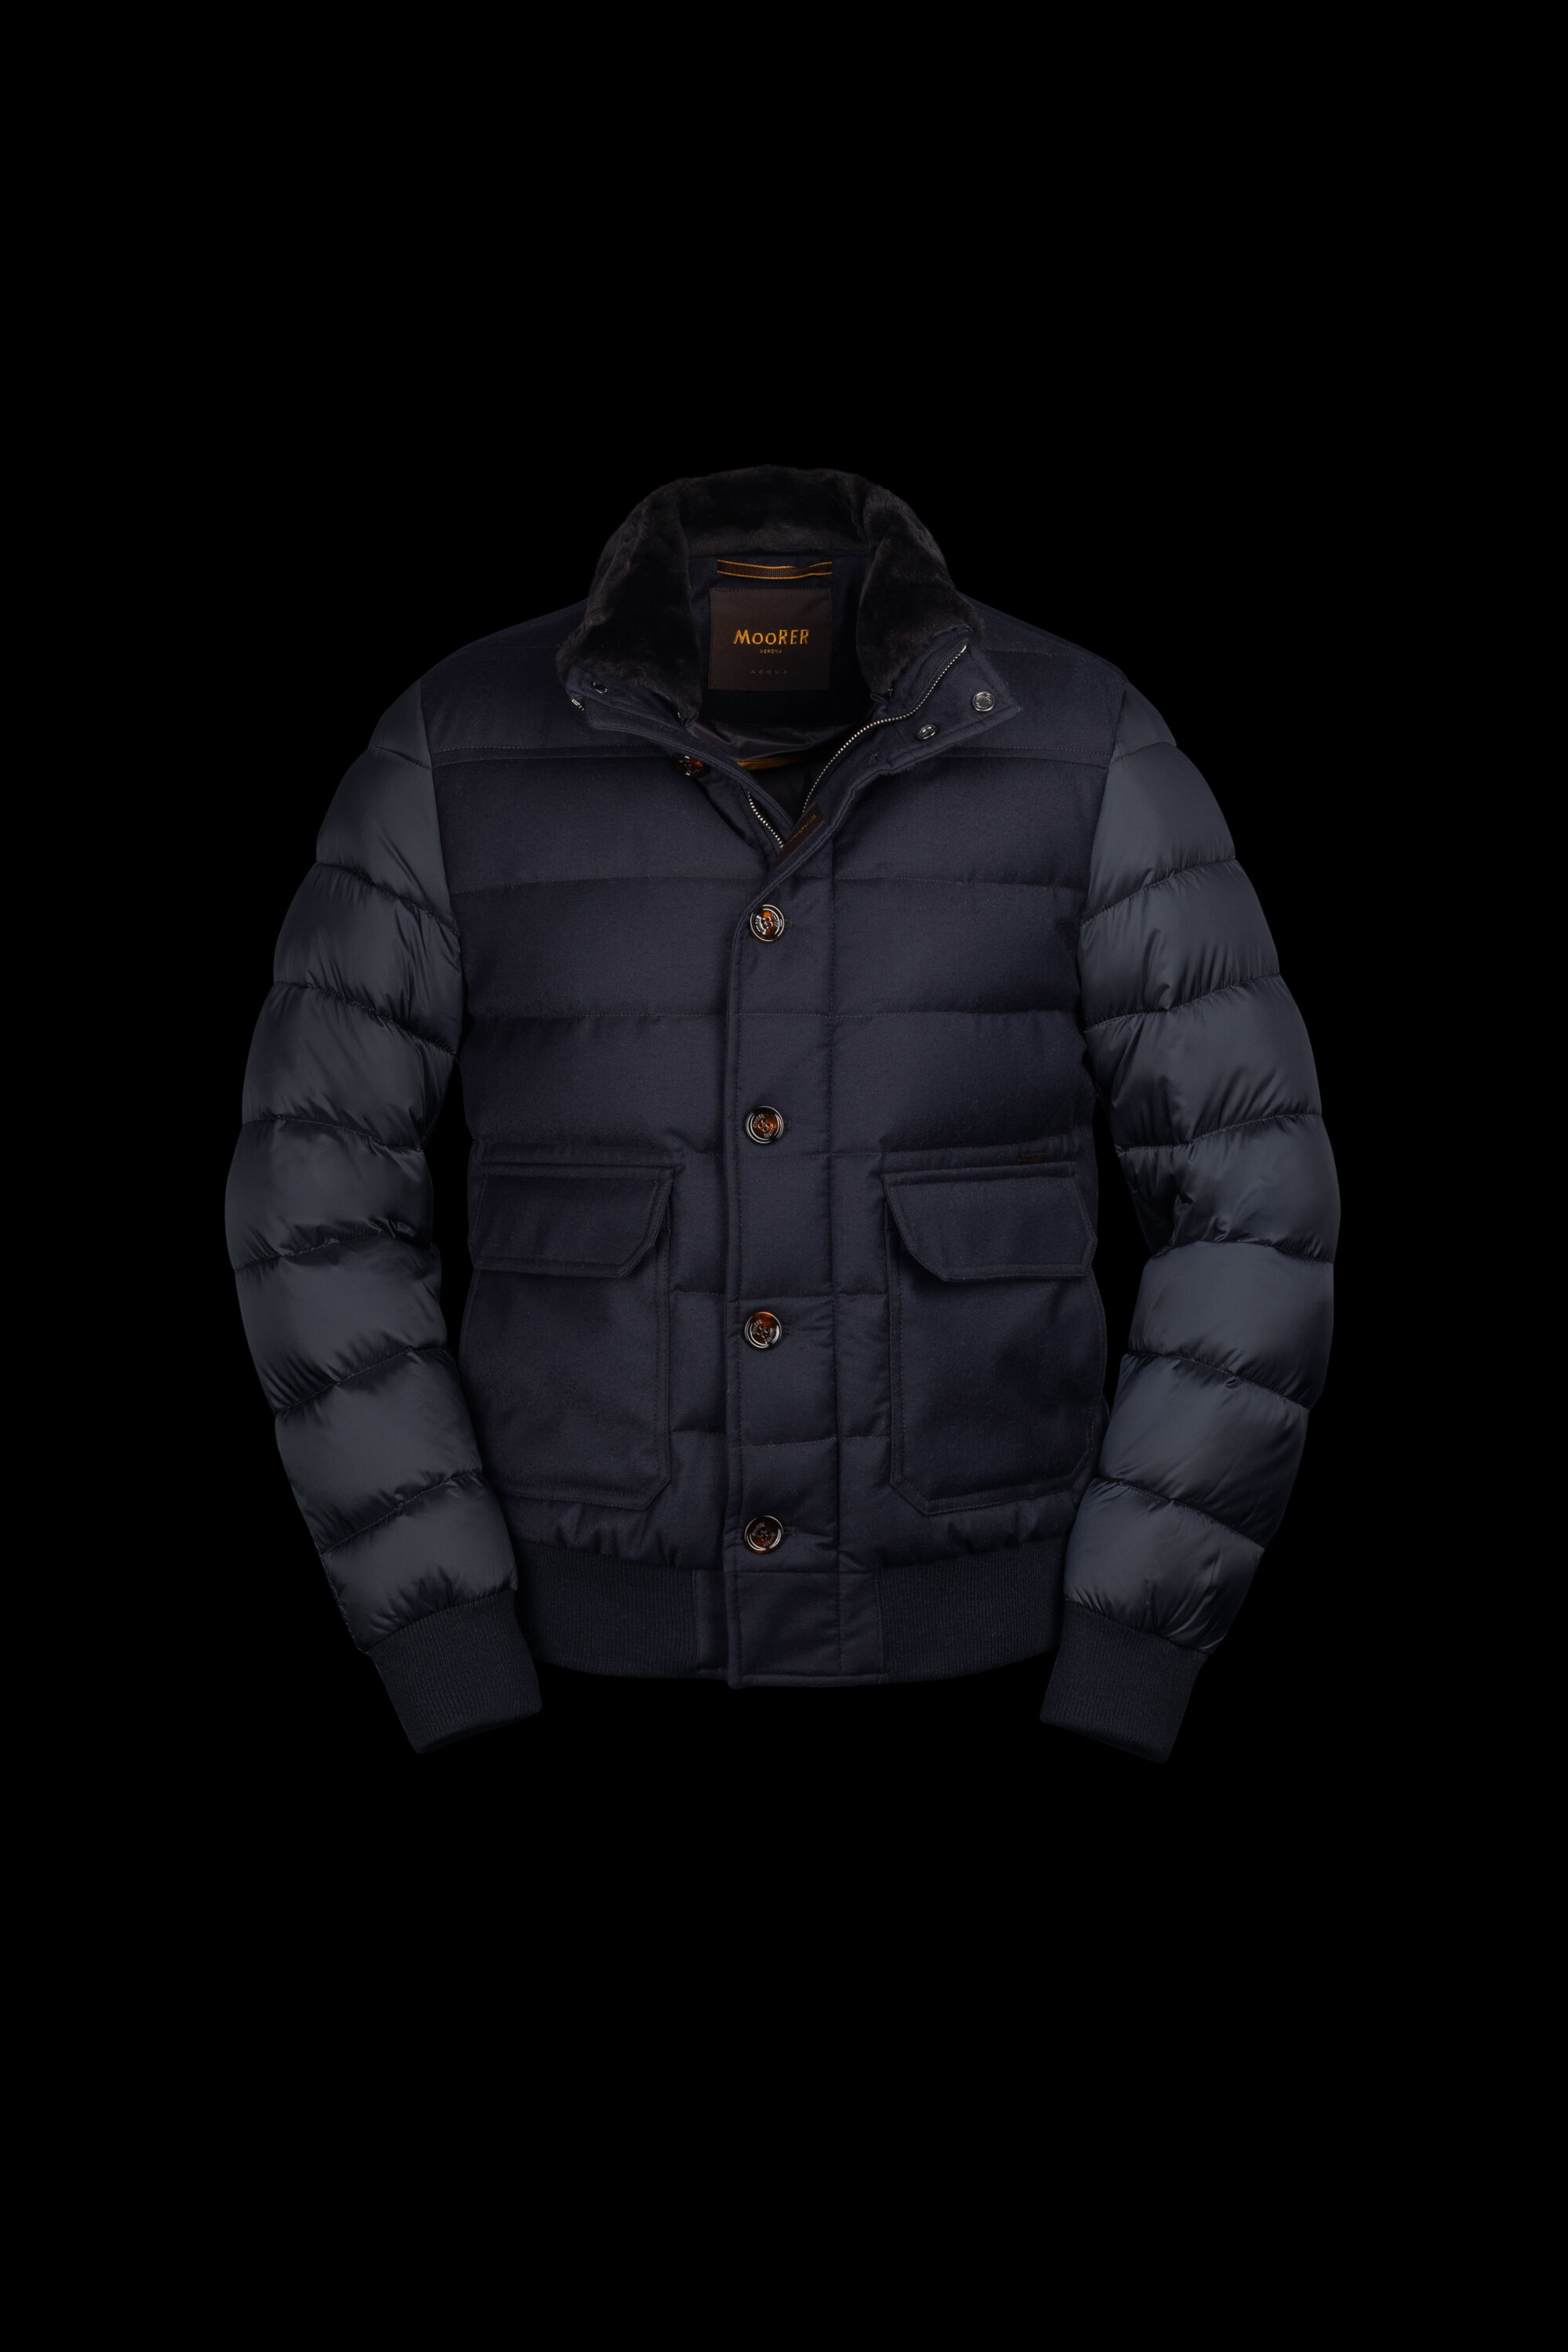 Men's Outerwear: Luxury Coats and Jackets made in Italy | MooRER®